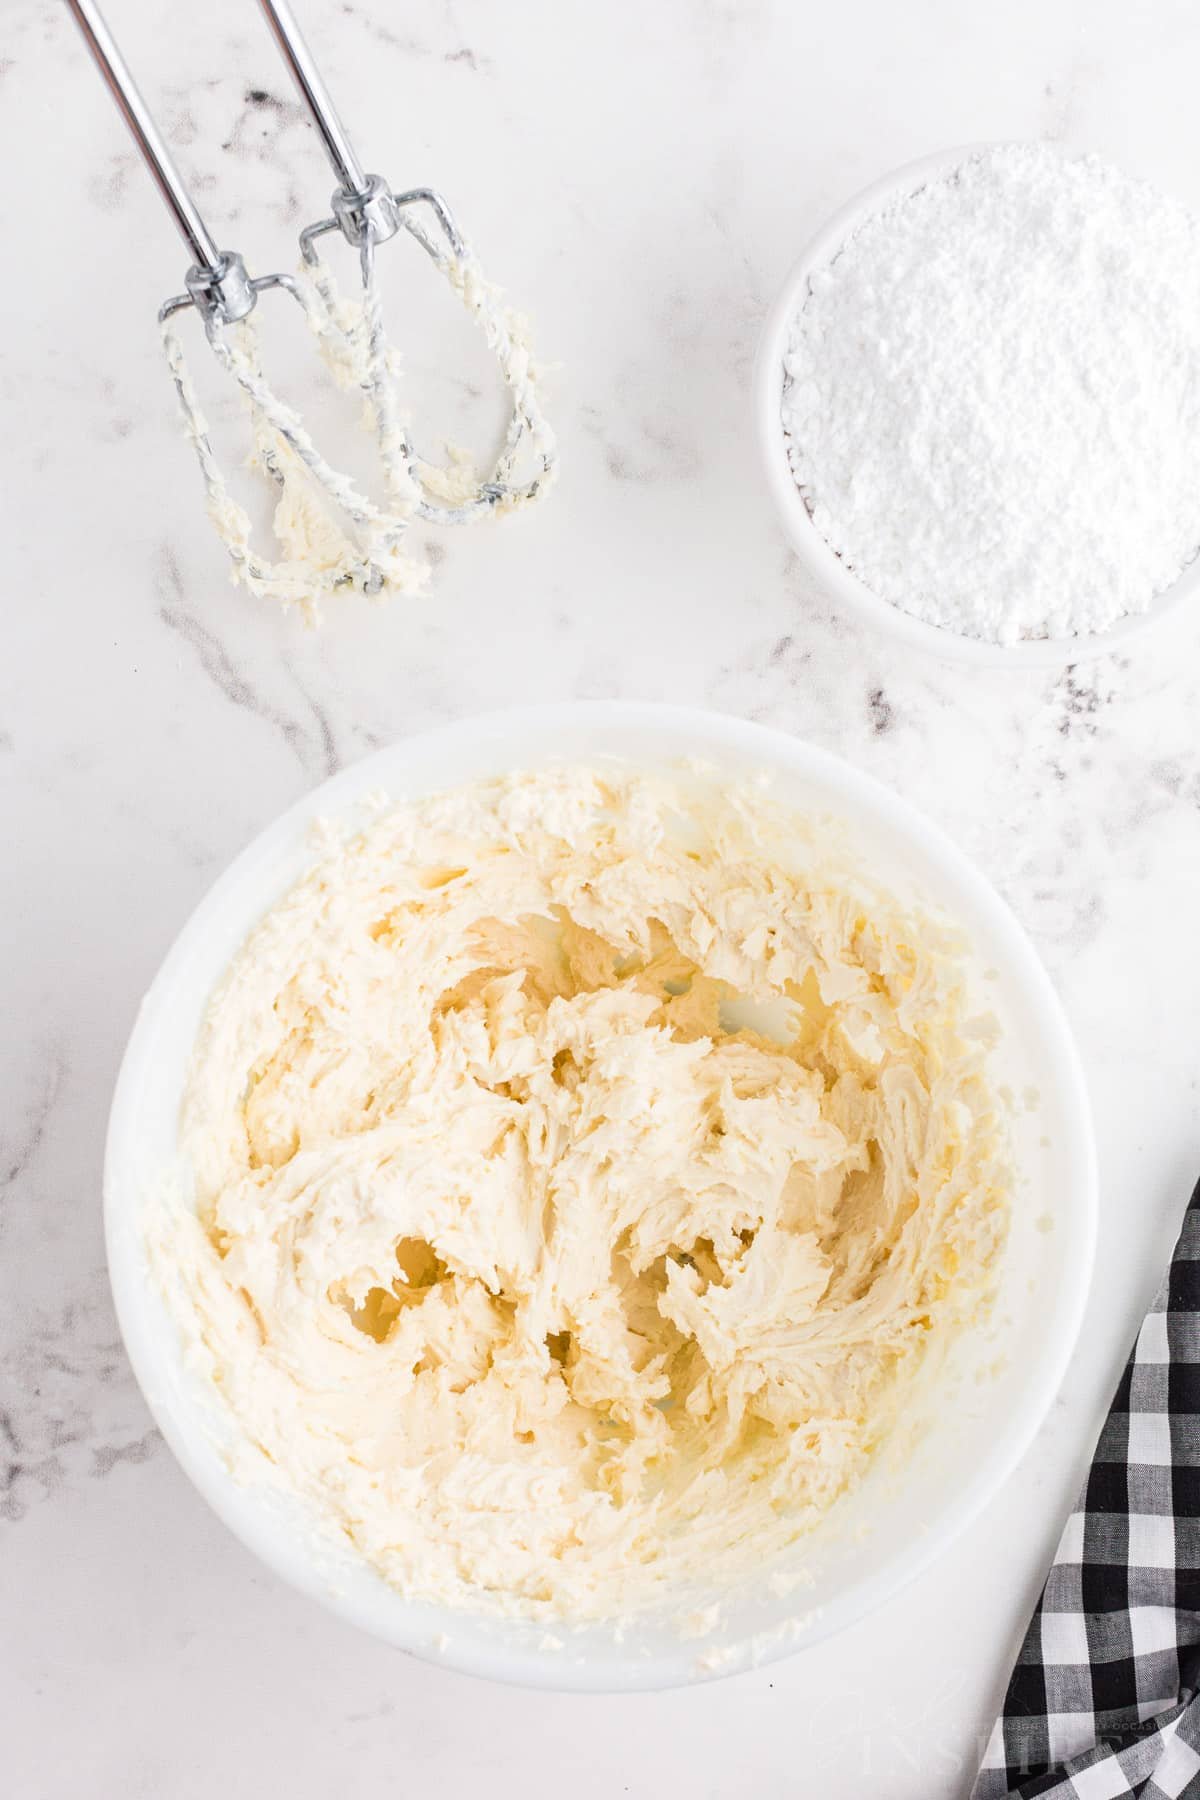 Bowl with mixed butter, cream cheese, and vanilla extract, hand mixer attachment with mixture.